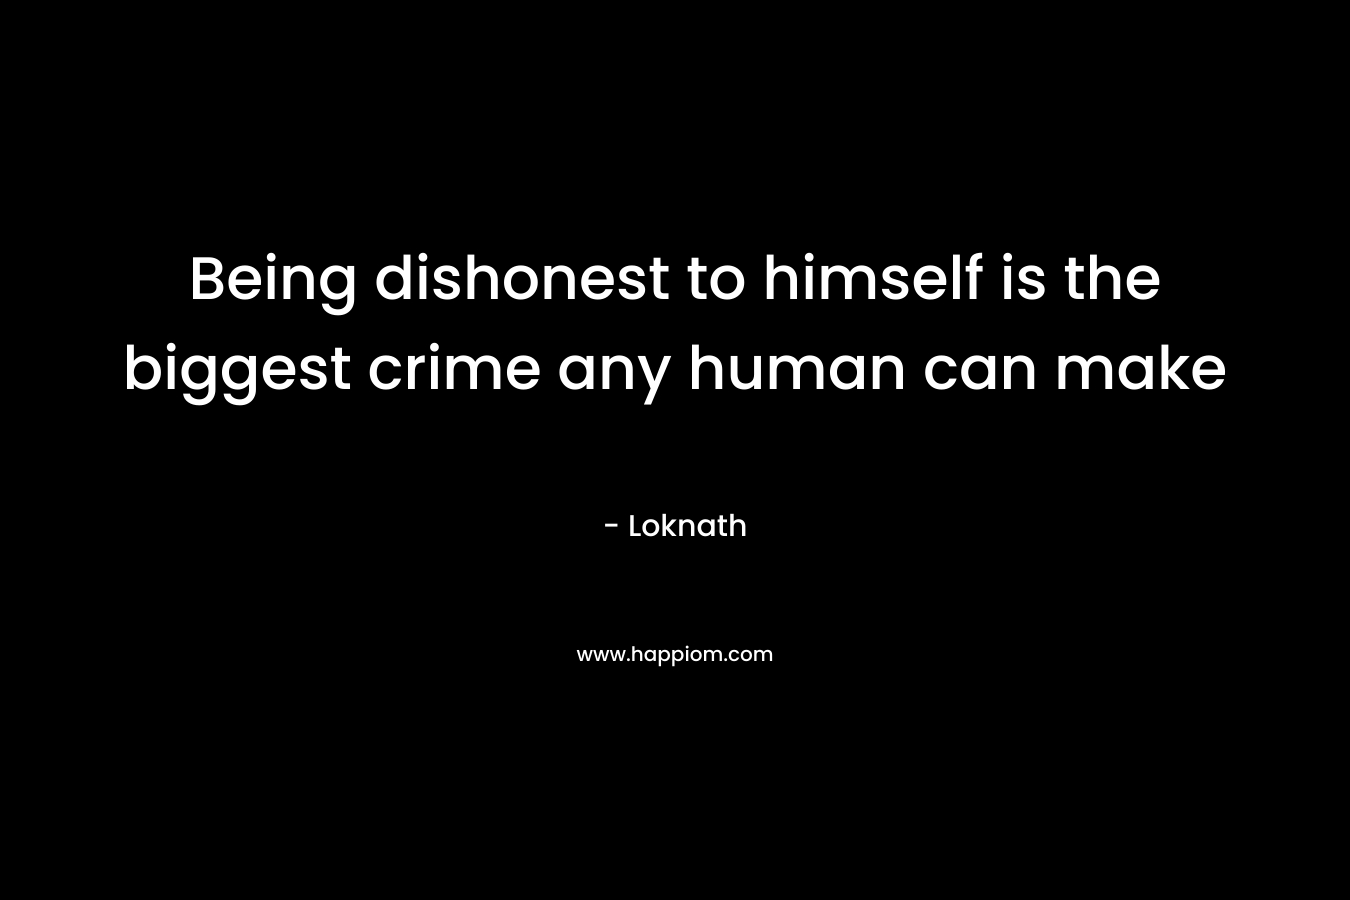 Being dishonest to himself is the biggest crime any human can make